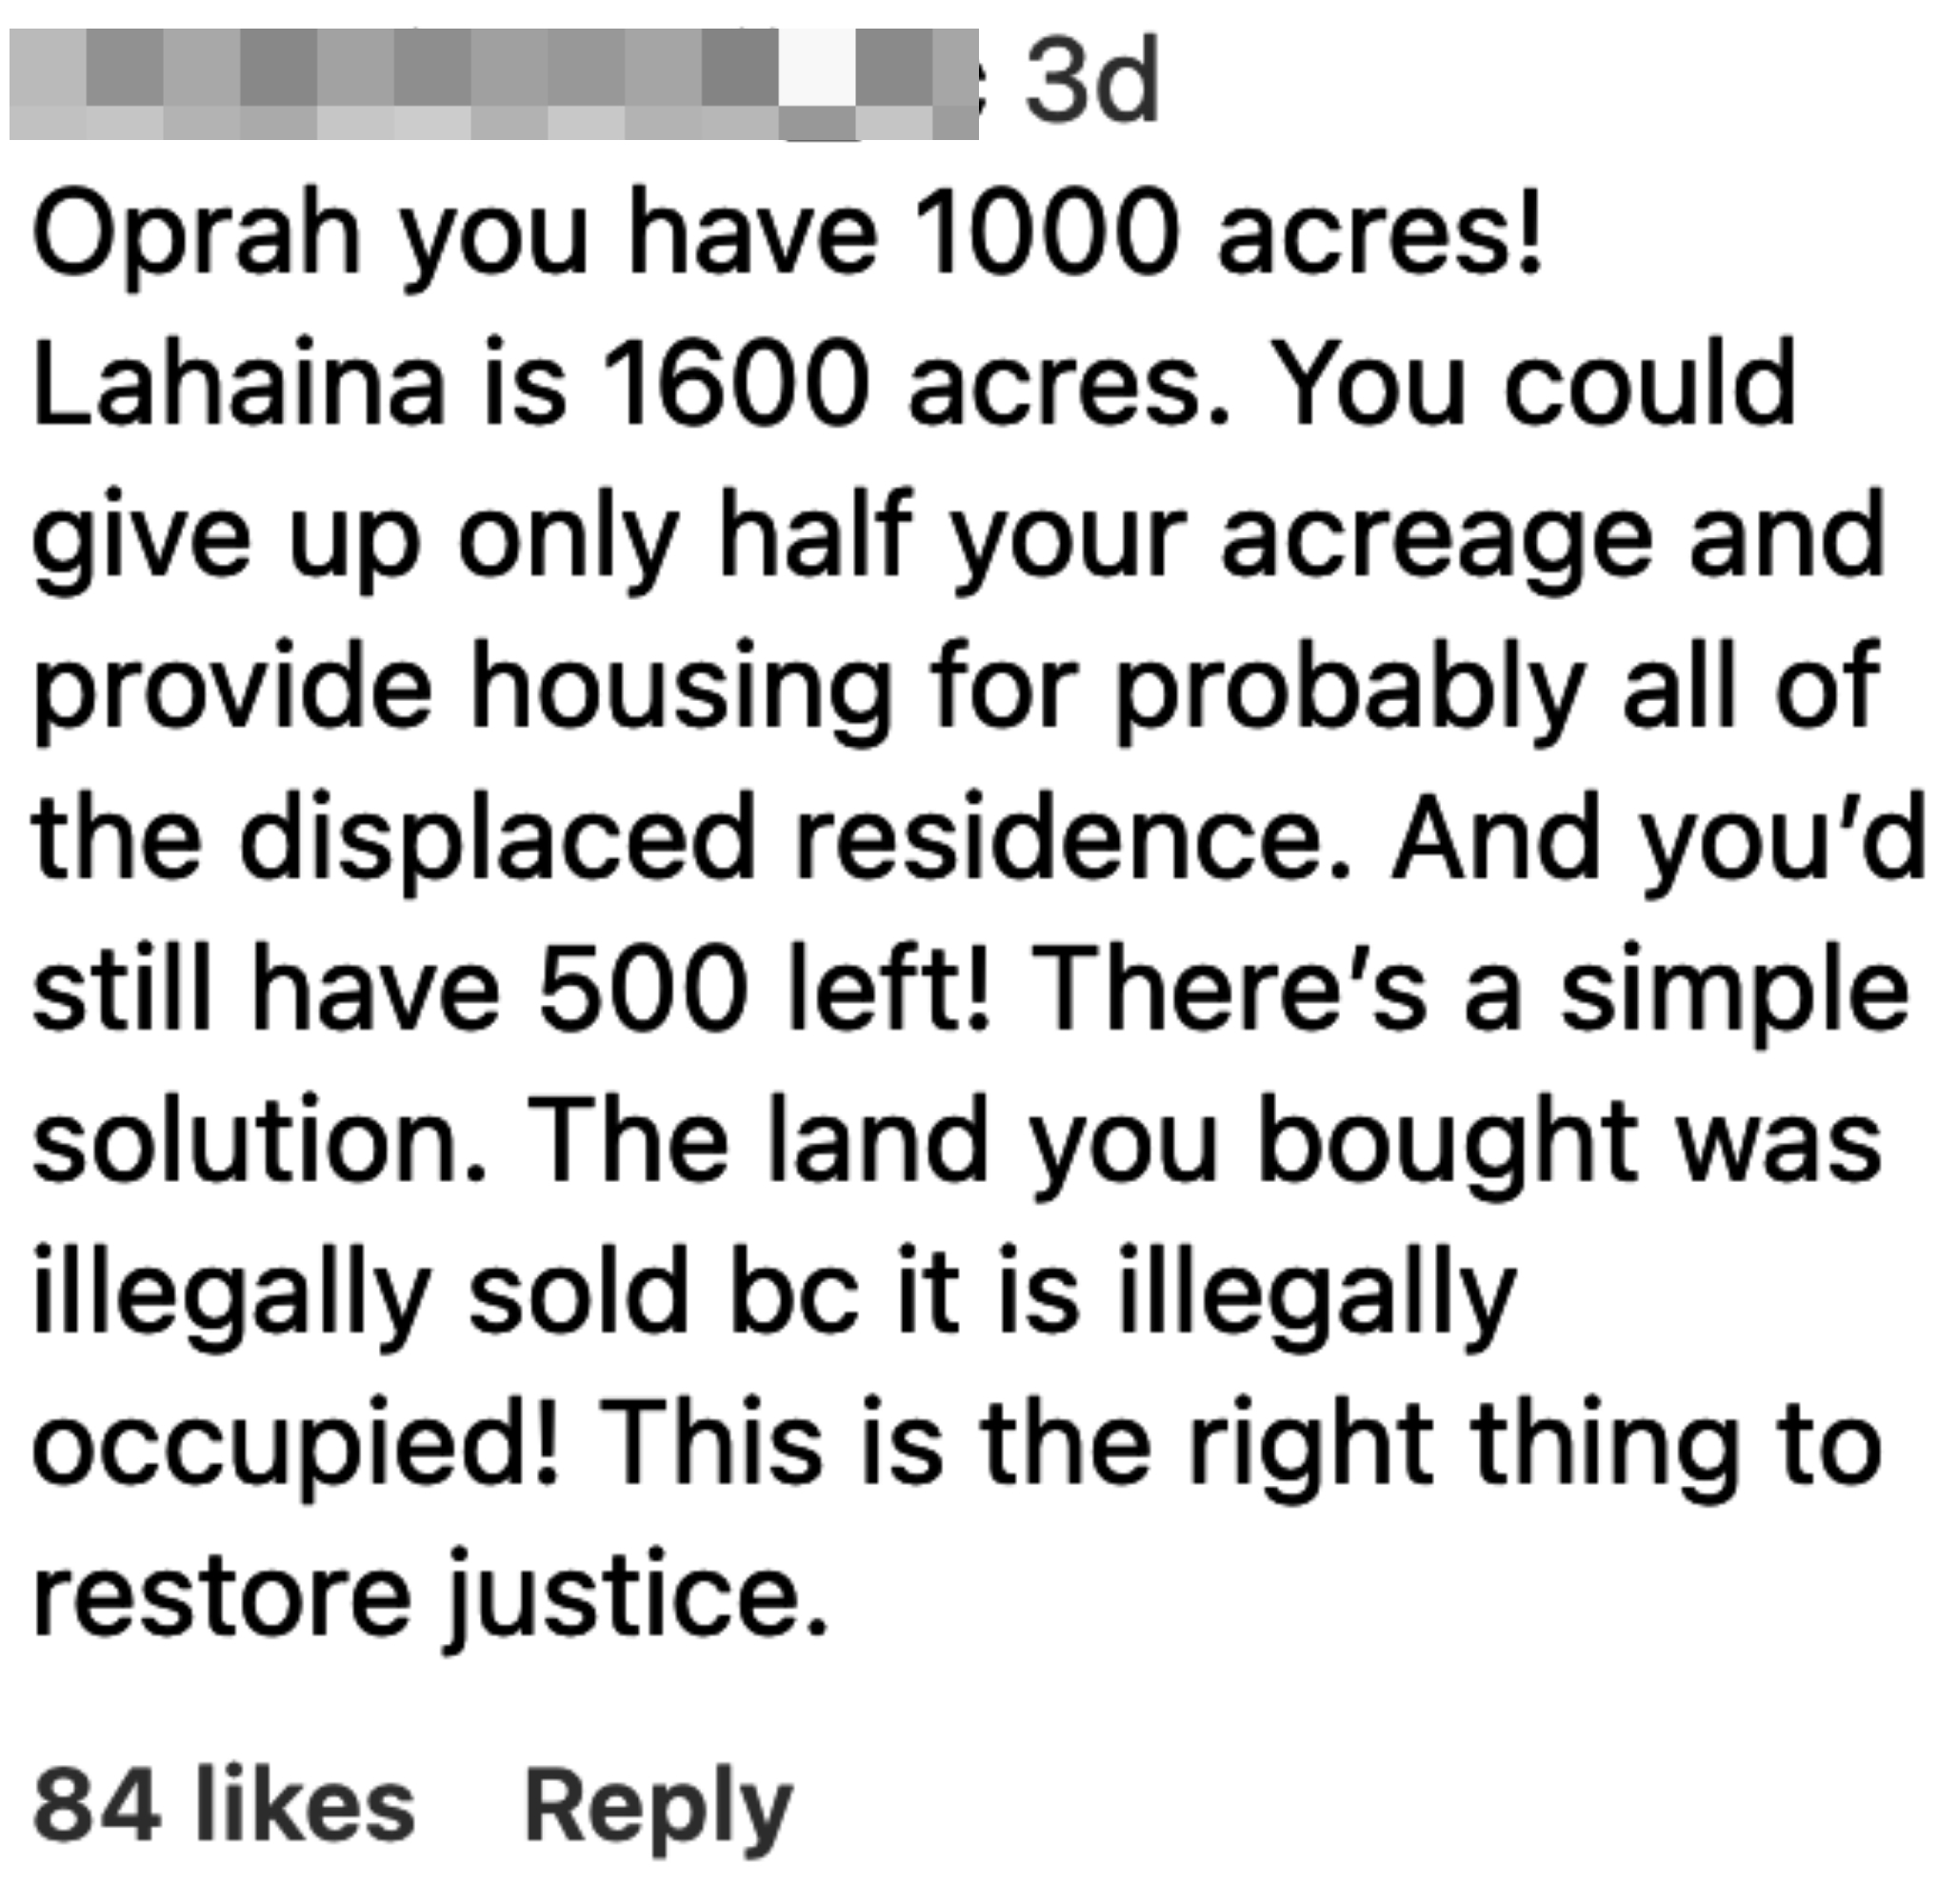 &quot;Oprah you have 1000 acres! Lahaina is 1600 acres; you could give up only half your acreage and provide housing for probably all of the displaced residence&quot; and &quot;The land you bought was illegally sold bc it is illegally occupied&quot;